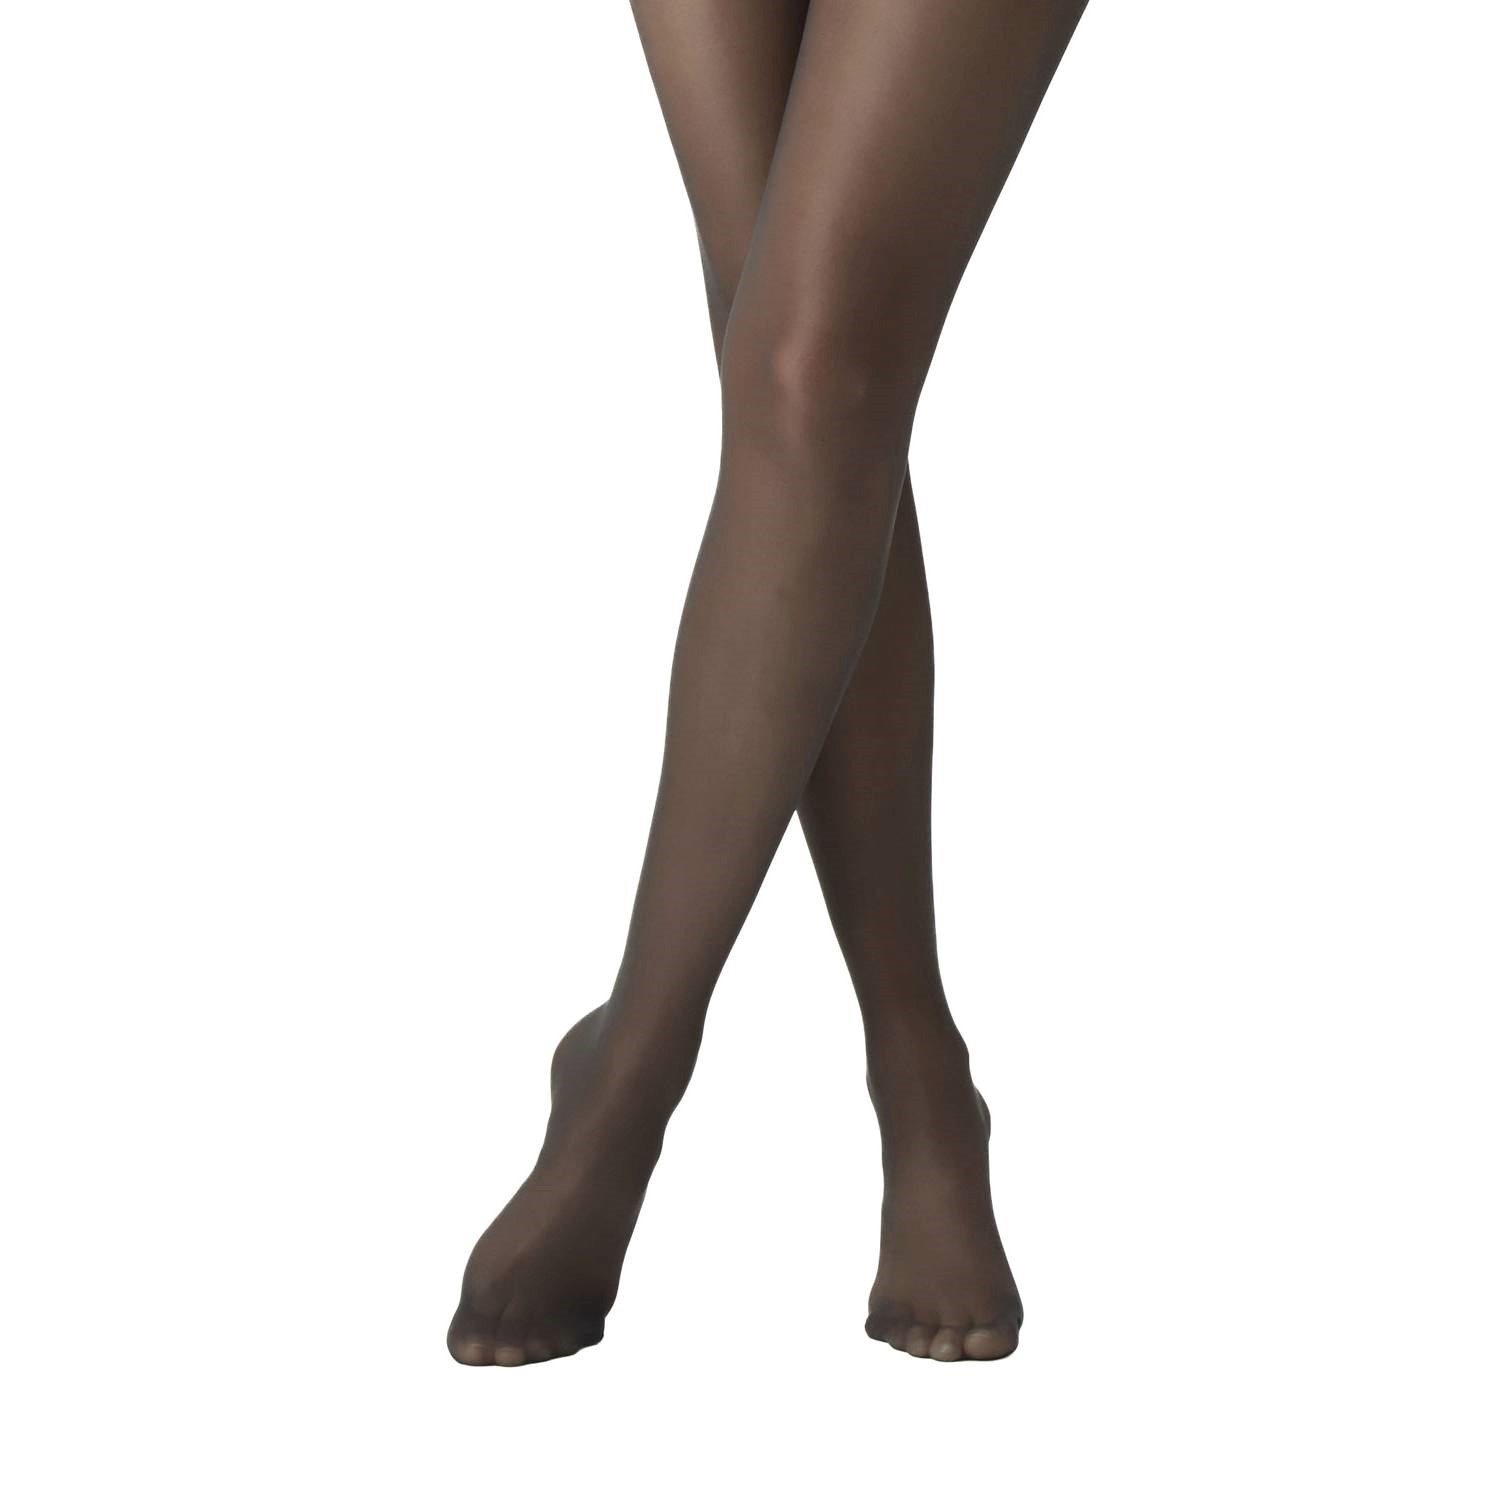 Oroblu Sensuel 20 Pure Beauty Tights In Stock At UK Tights